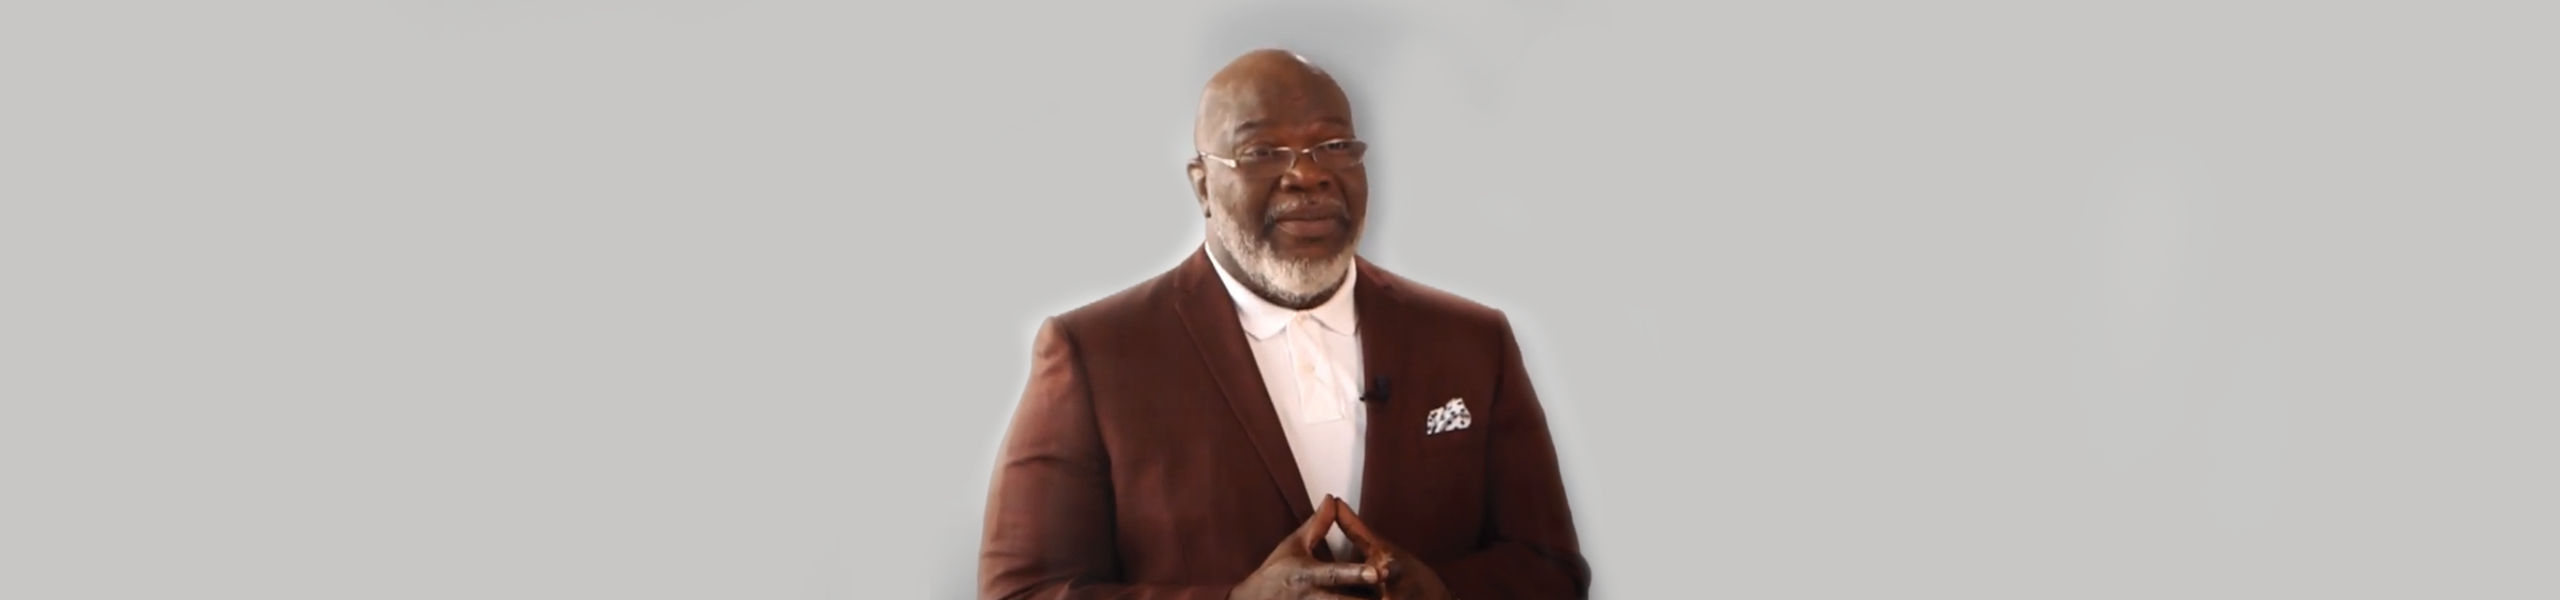 Instinct The Power To Unleash Your Inborn Drive - The Book | T.D. Jakes